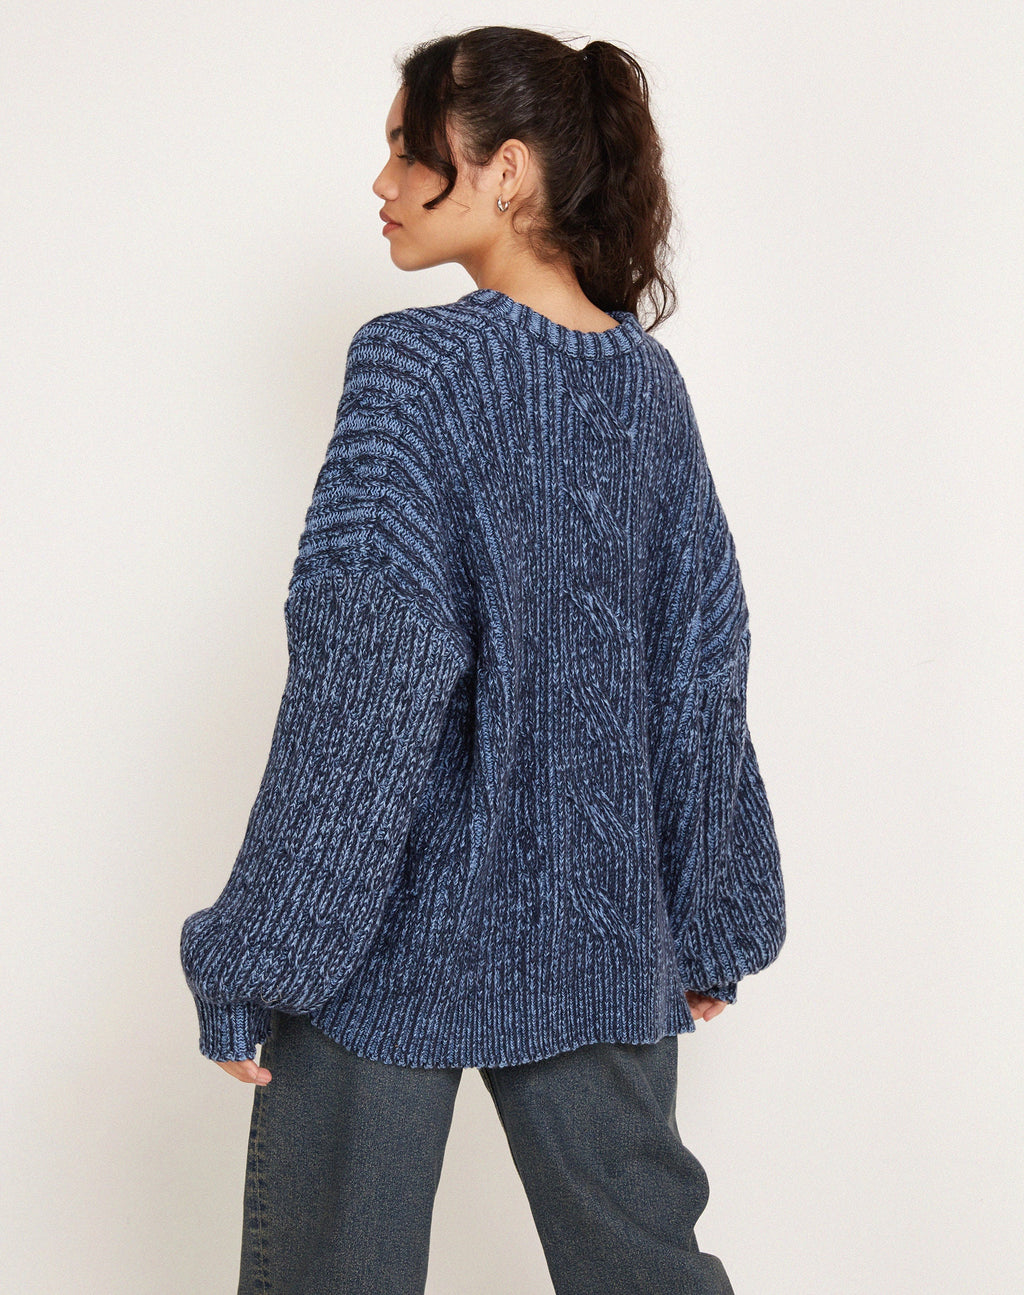 Amieta Knitted Jumper in Two Tone Blue